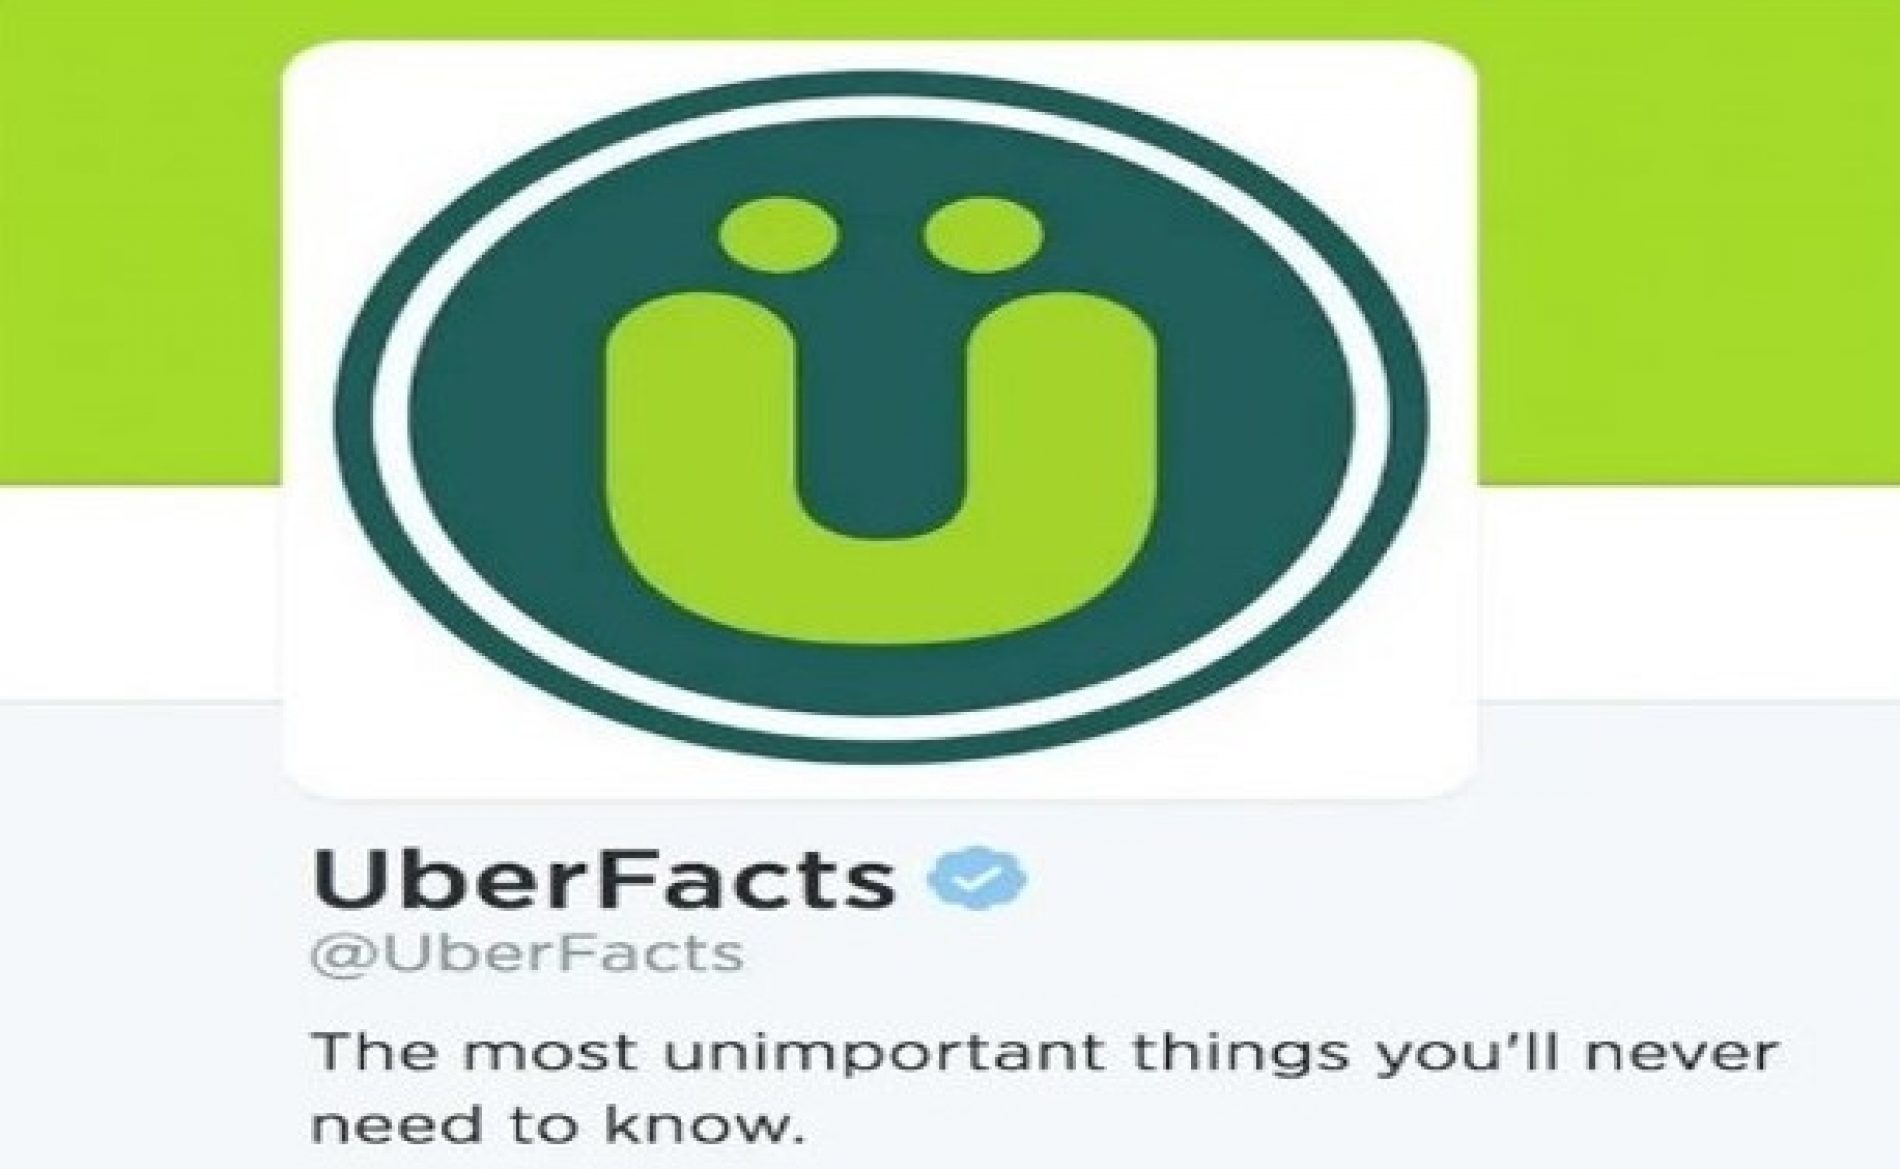 According to Uber-Facts…III